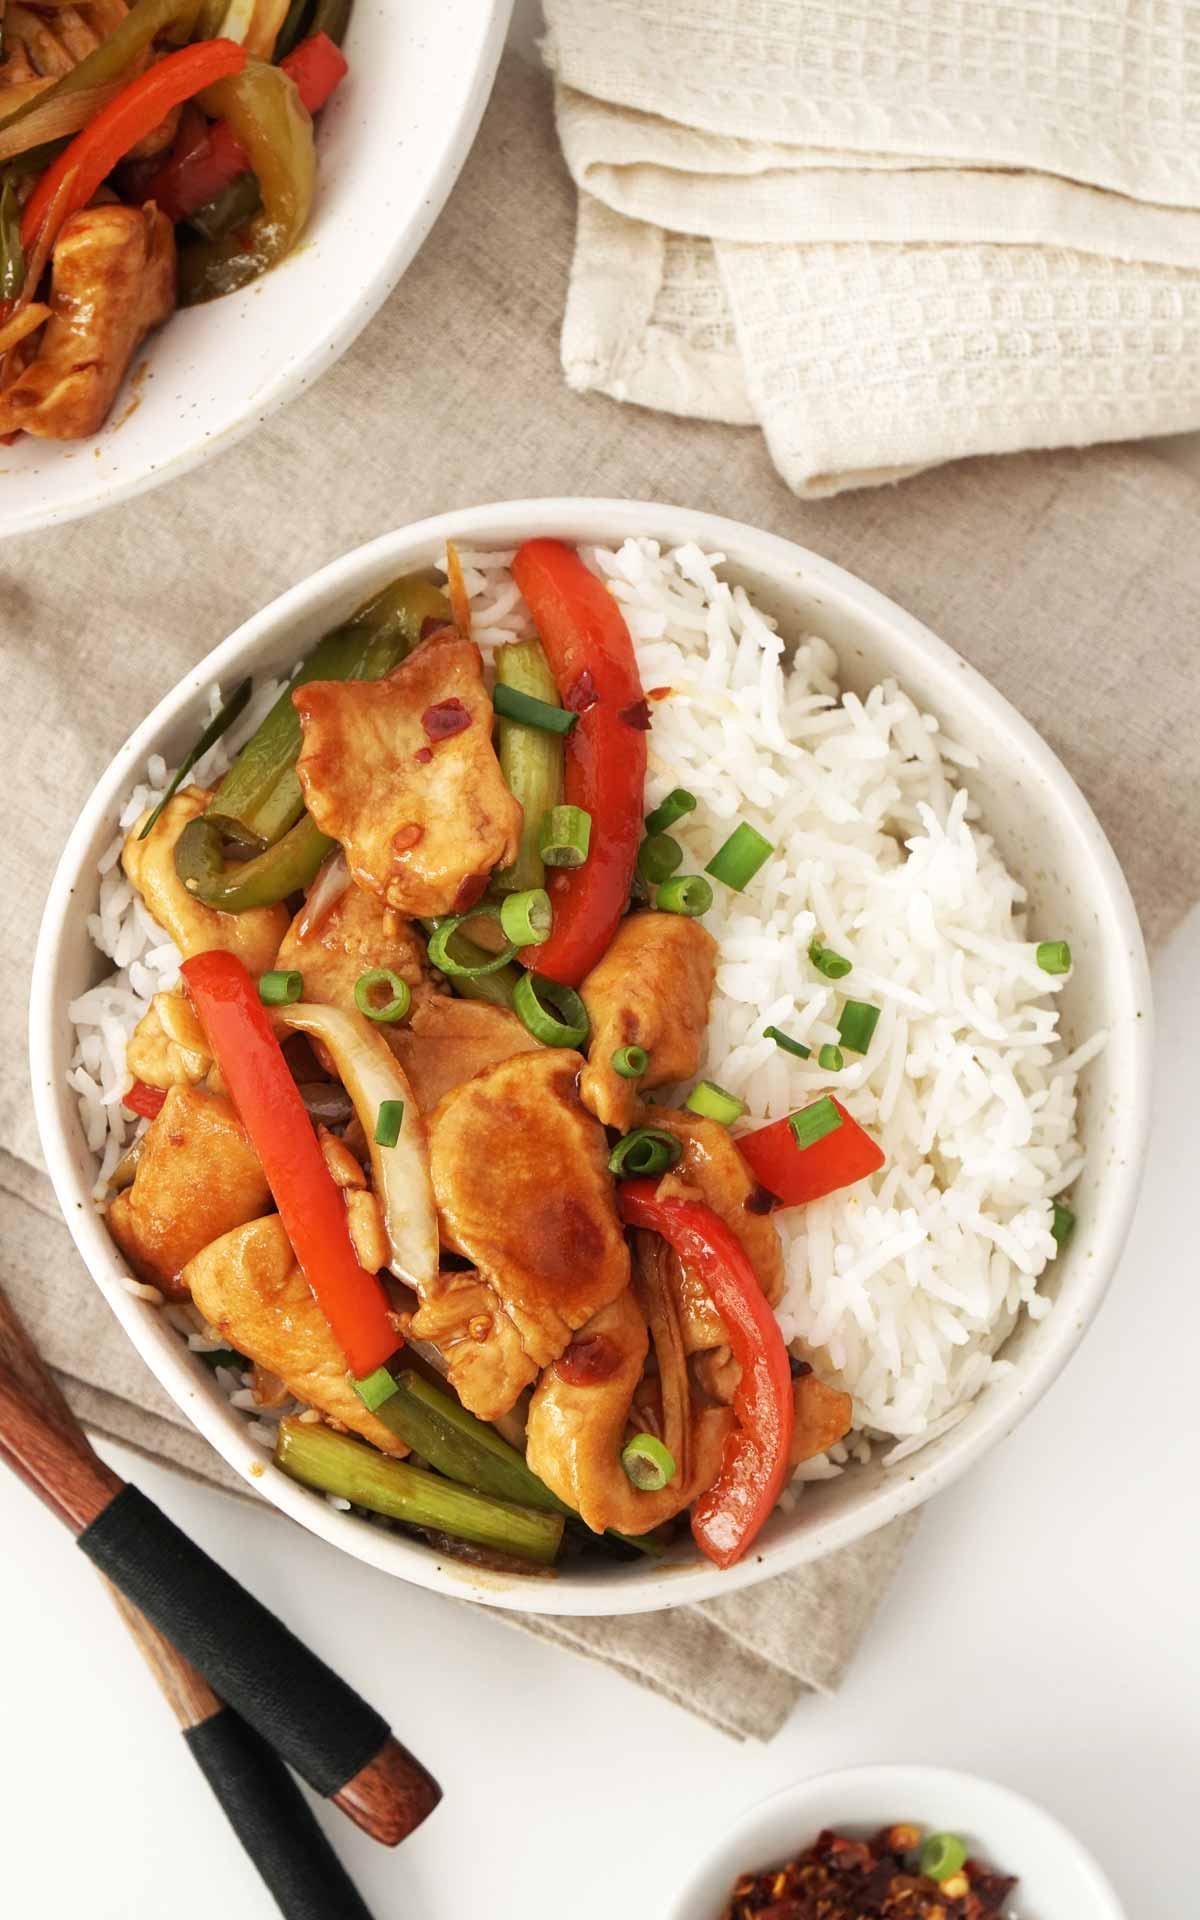 A rice bowl containing stir fried chicken with bell peppers, spring onions, and hoisin sauce. 